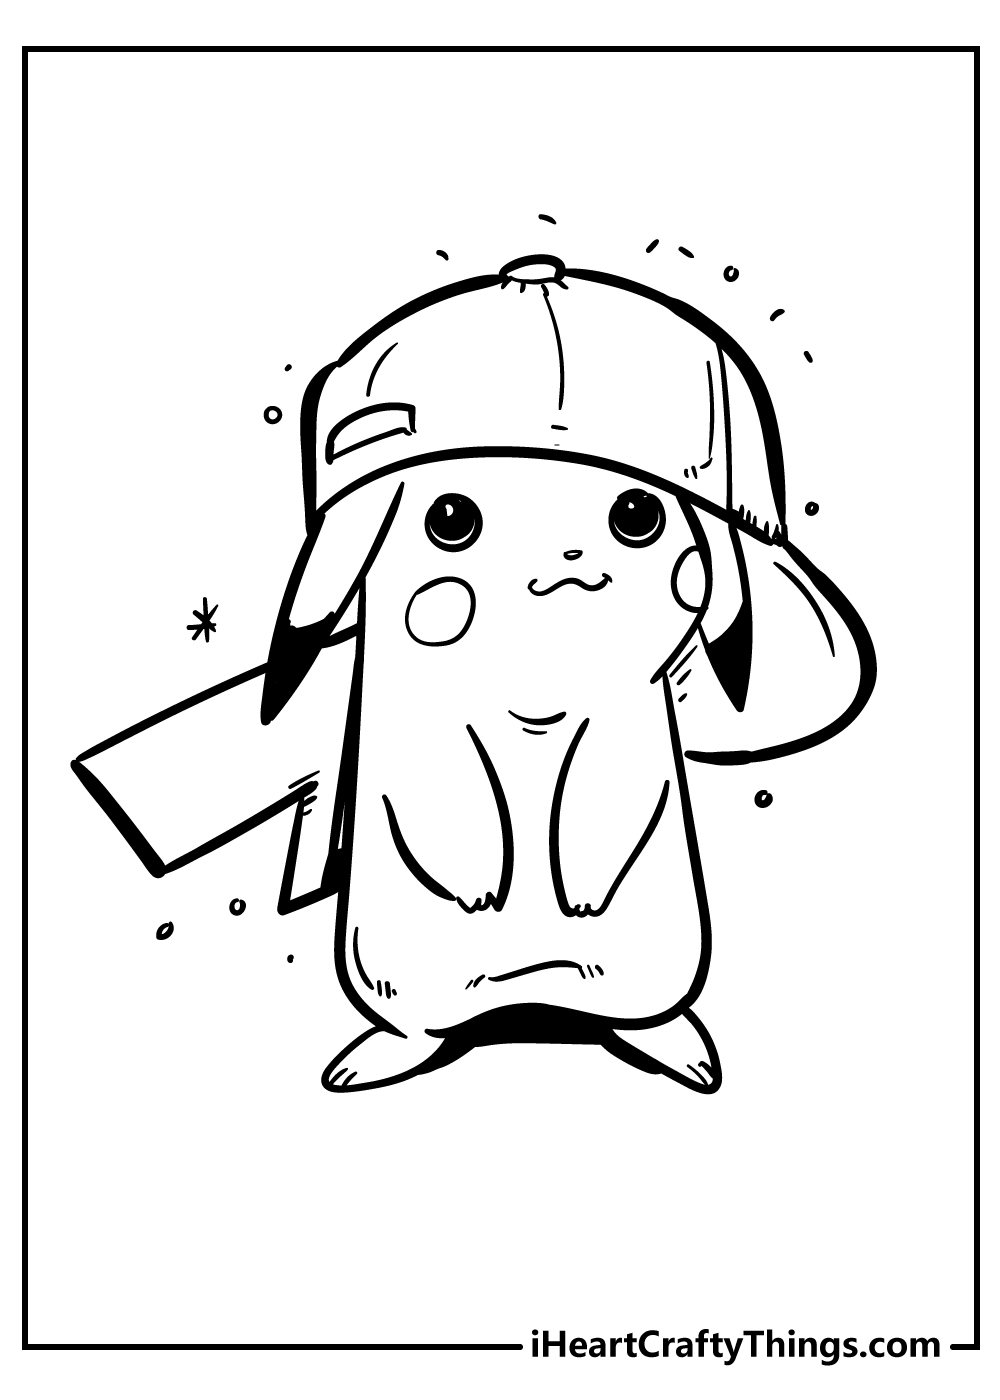 Pikachu coloring pages free printables